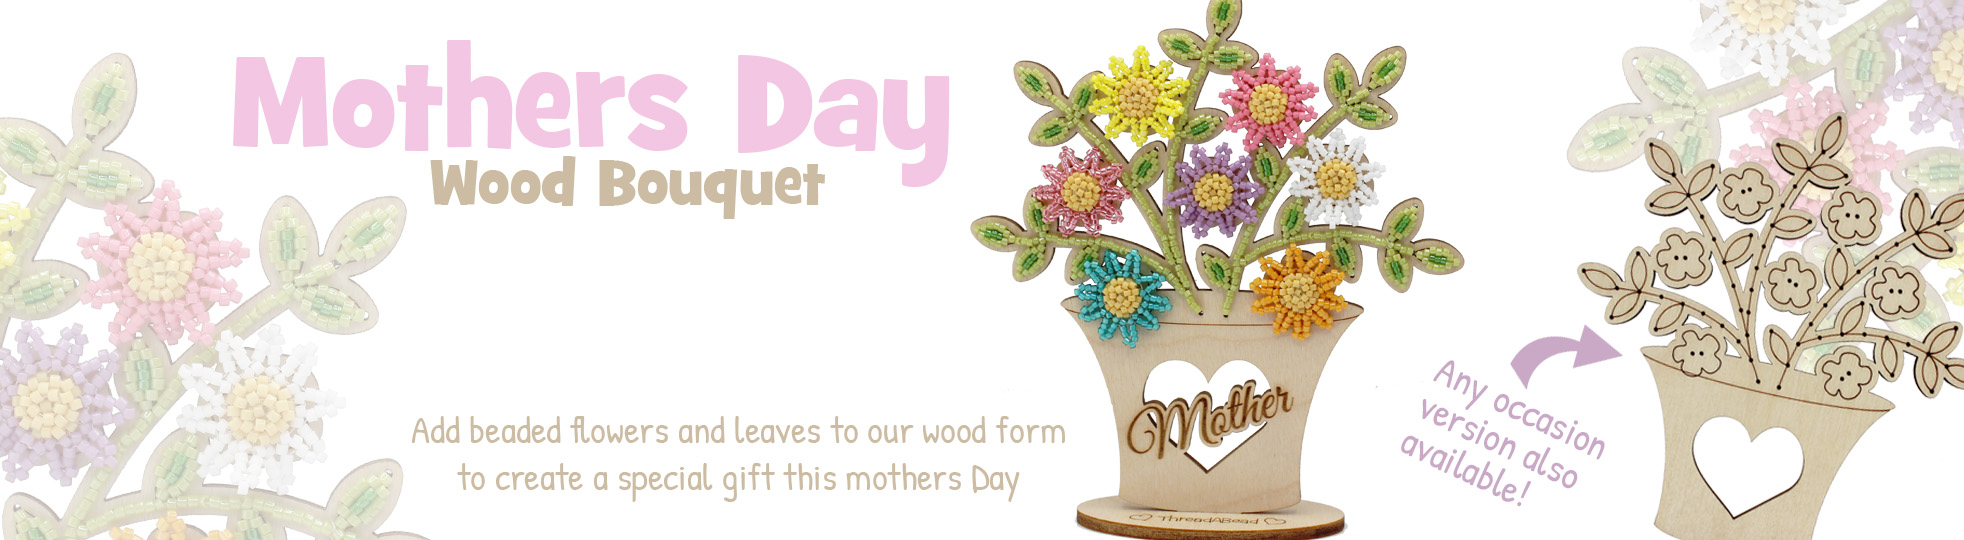 Mothers Day Wood Bouquet Wood Form and Stand